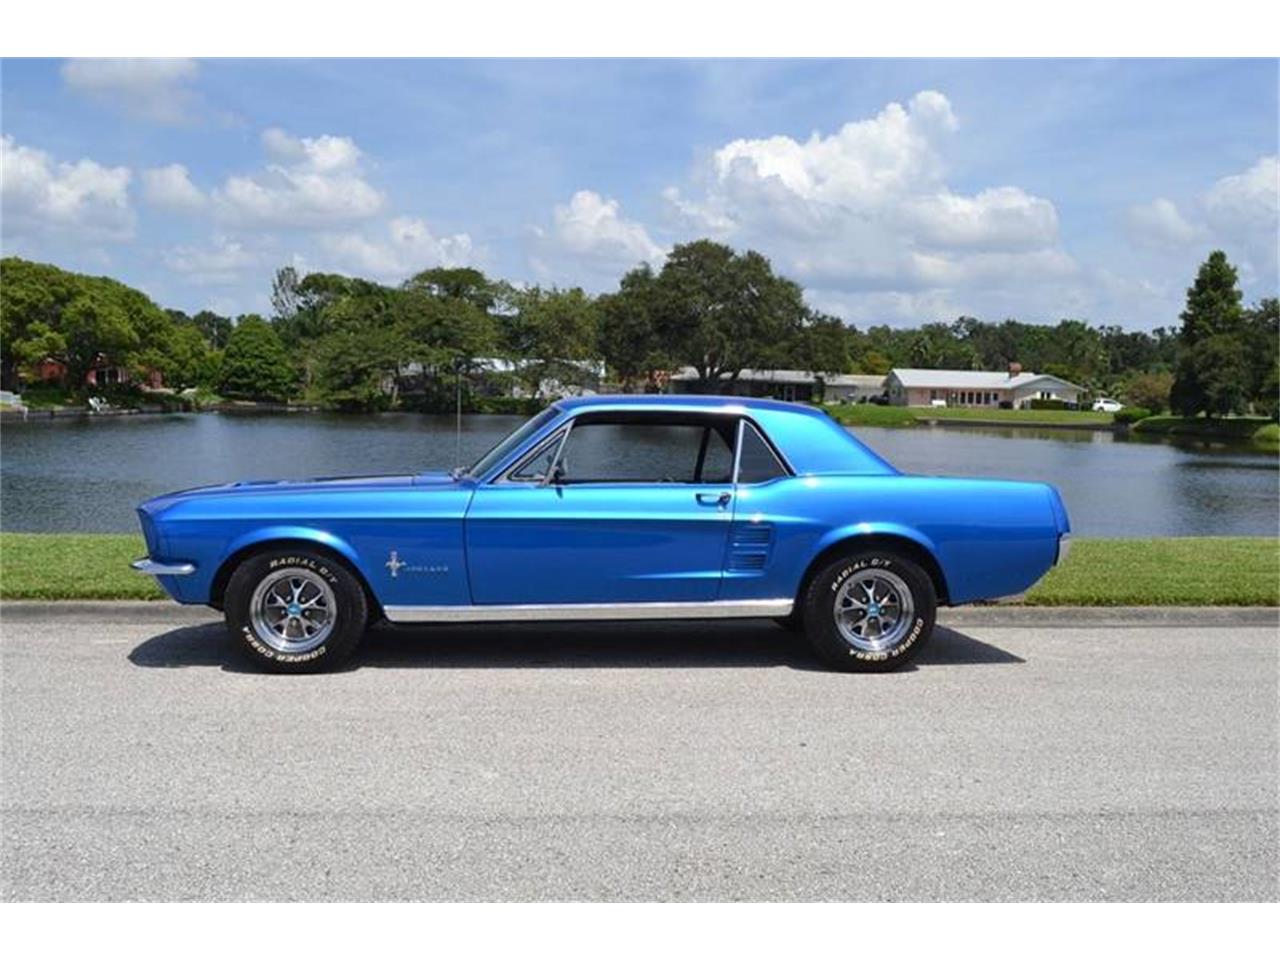 Winter Park Turquoise 1967 Ford Mustang